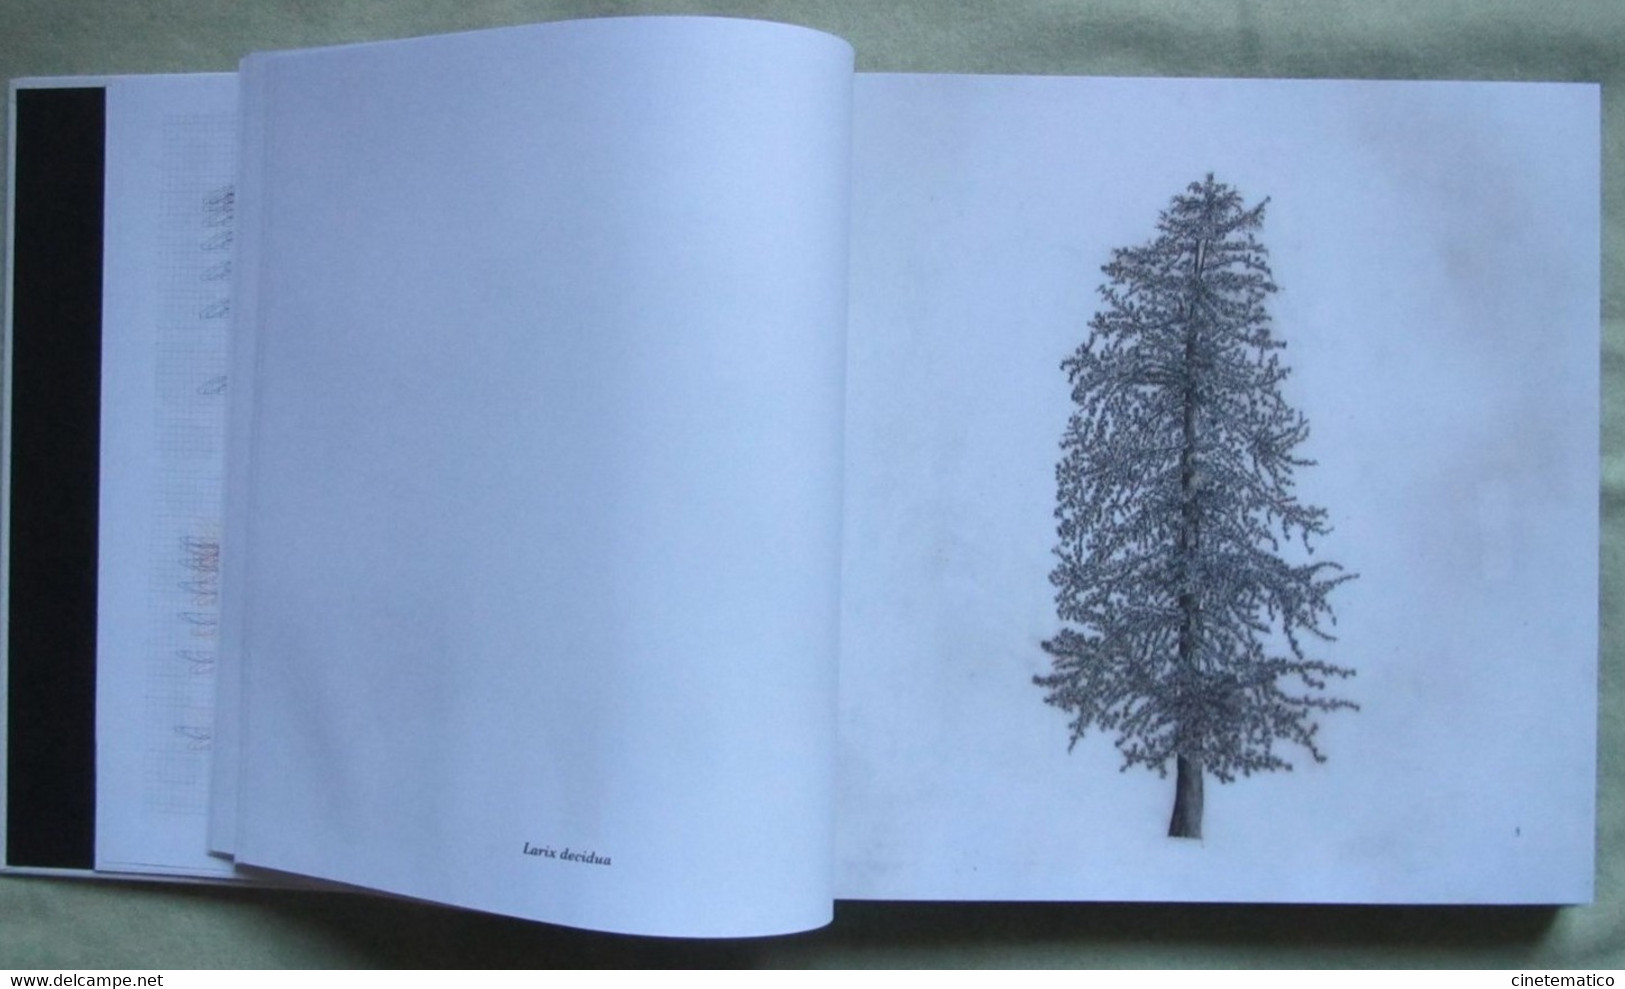 book/livre/buch/libro CUBE/IQOS: photography art communication architecture and trees